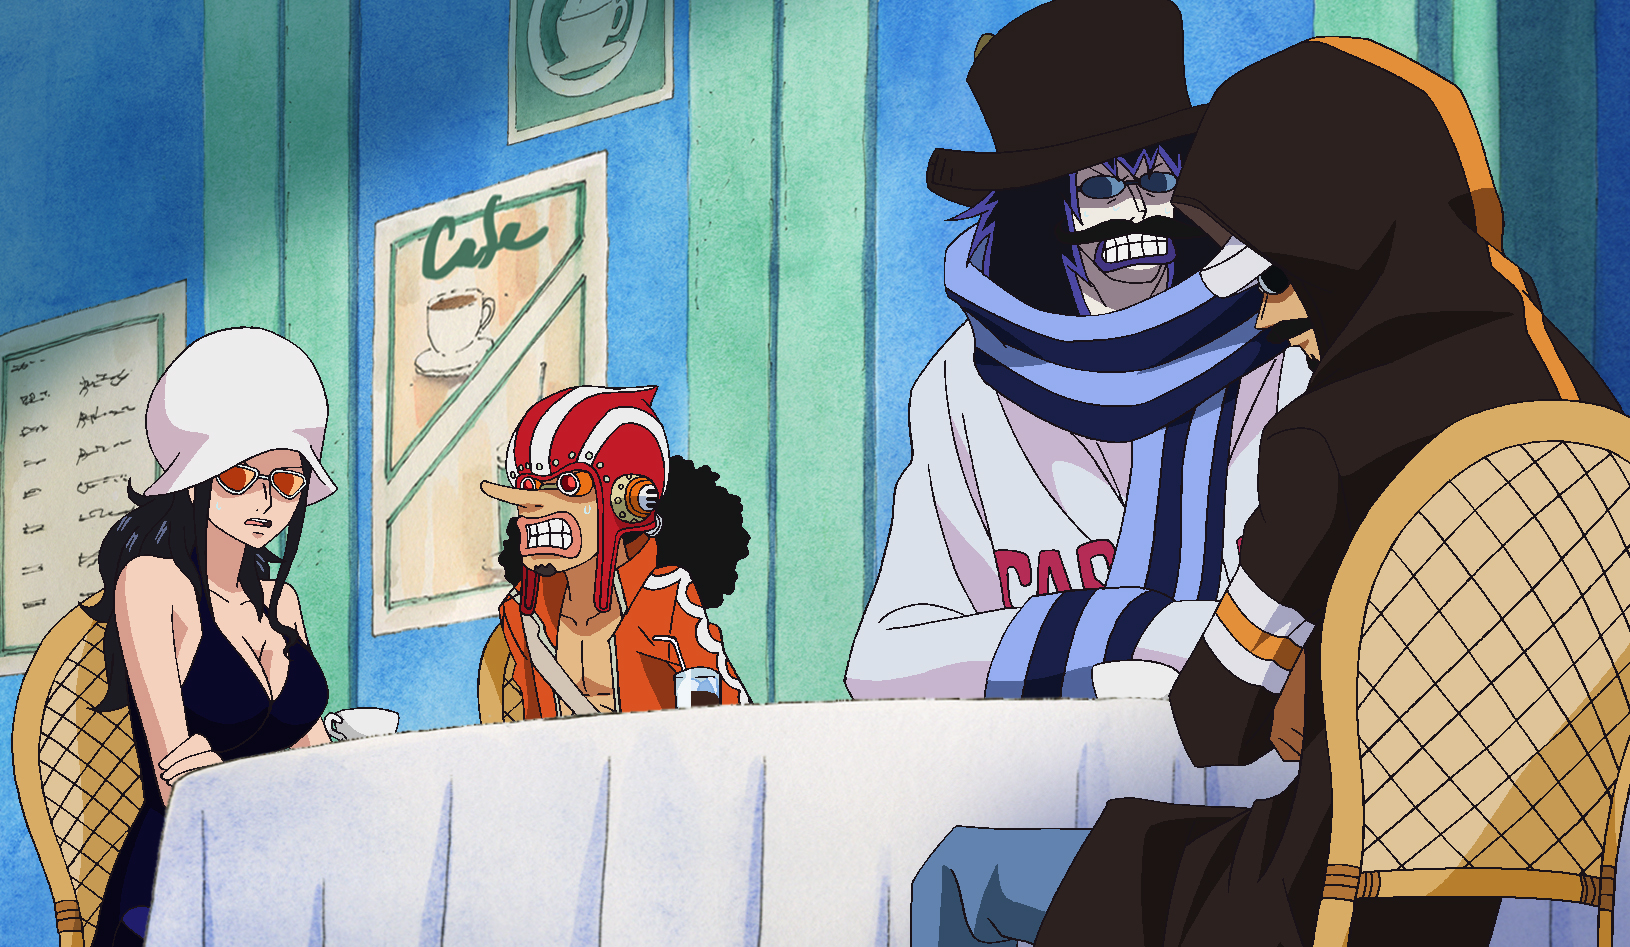 One Piece Episode 1026 Stuns Fans with Toei's Sickest Animation Yet